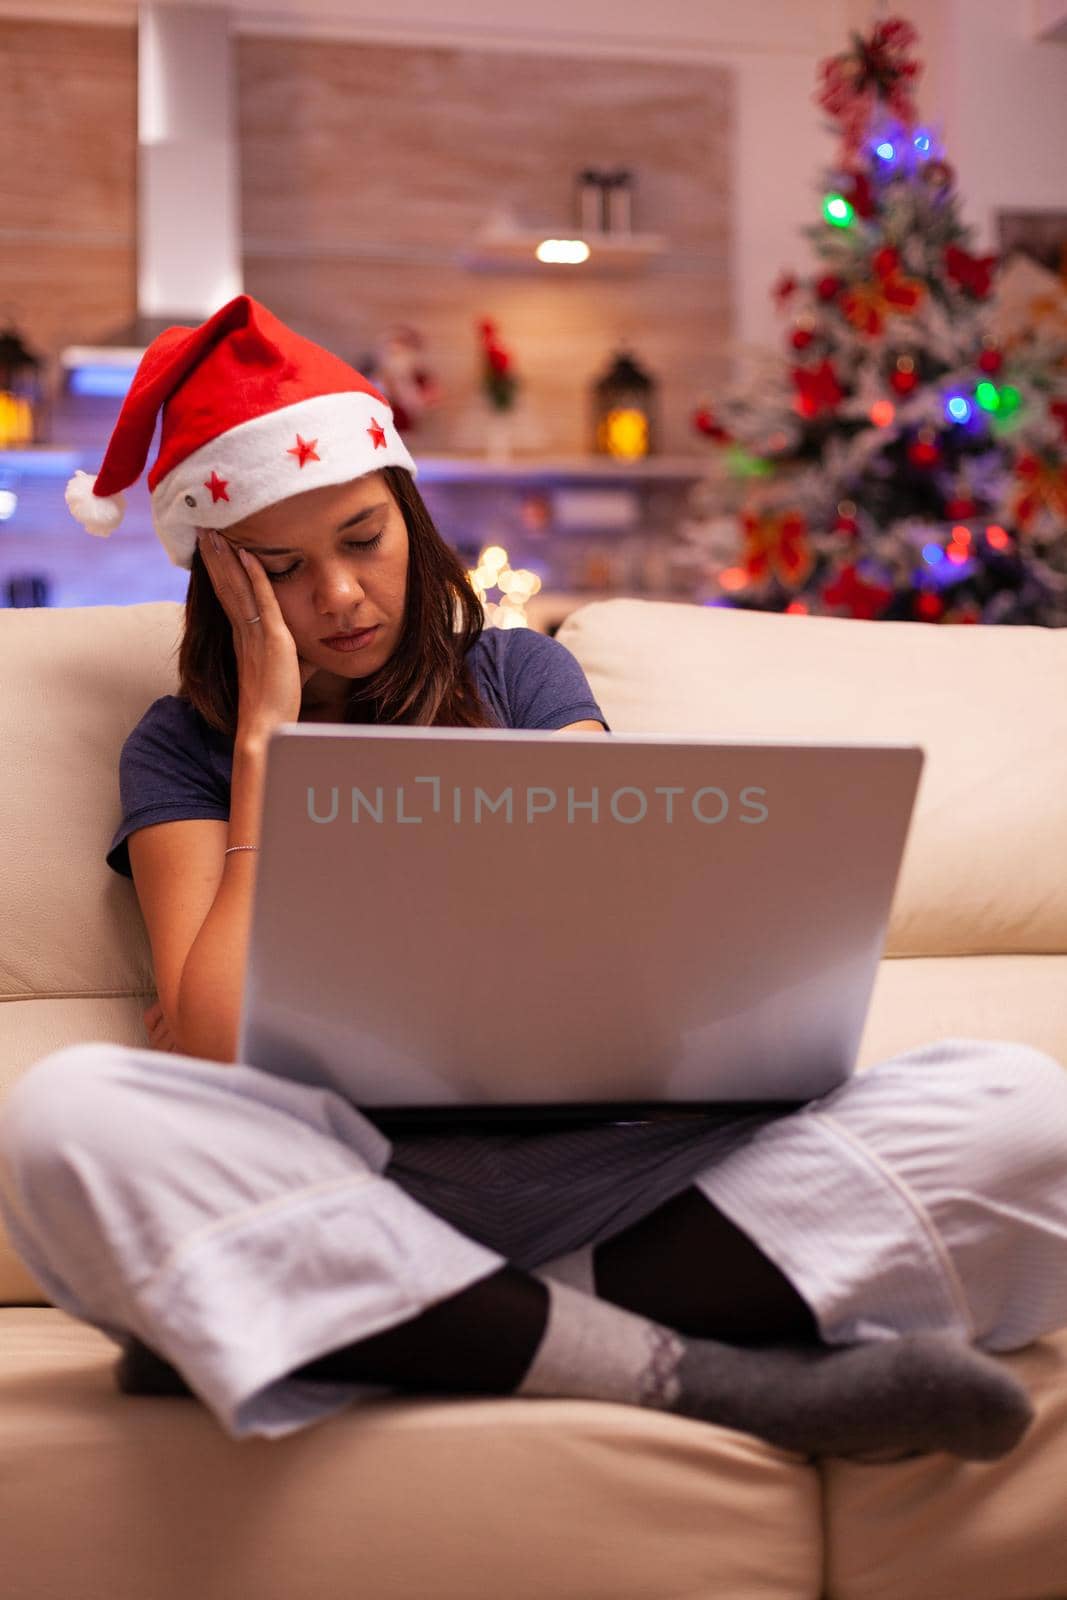 Tired exhausted woman falling asleep on couch in xmas decorated kitchen while reading business email on computer. Caucasian female celebrating christmas holiday enjoying winter season